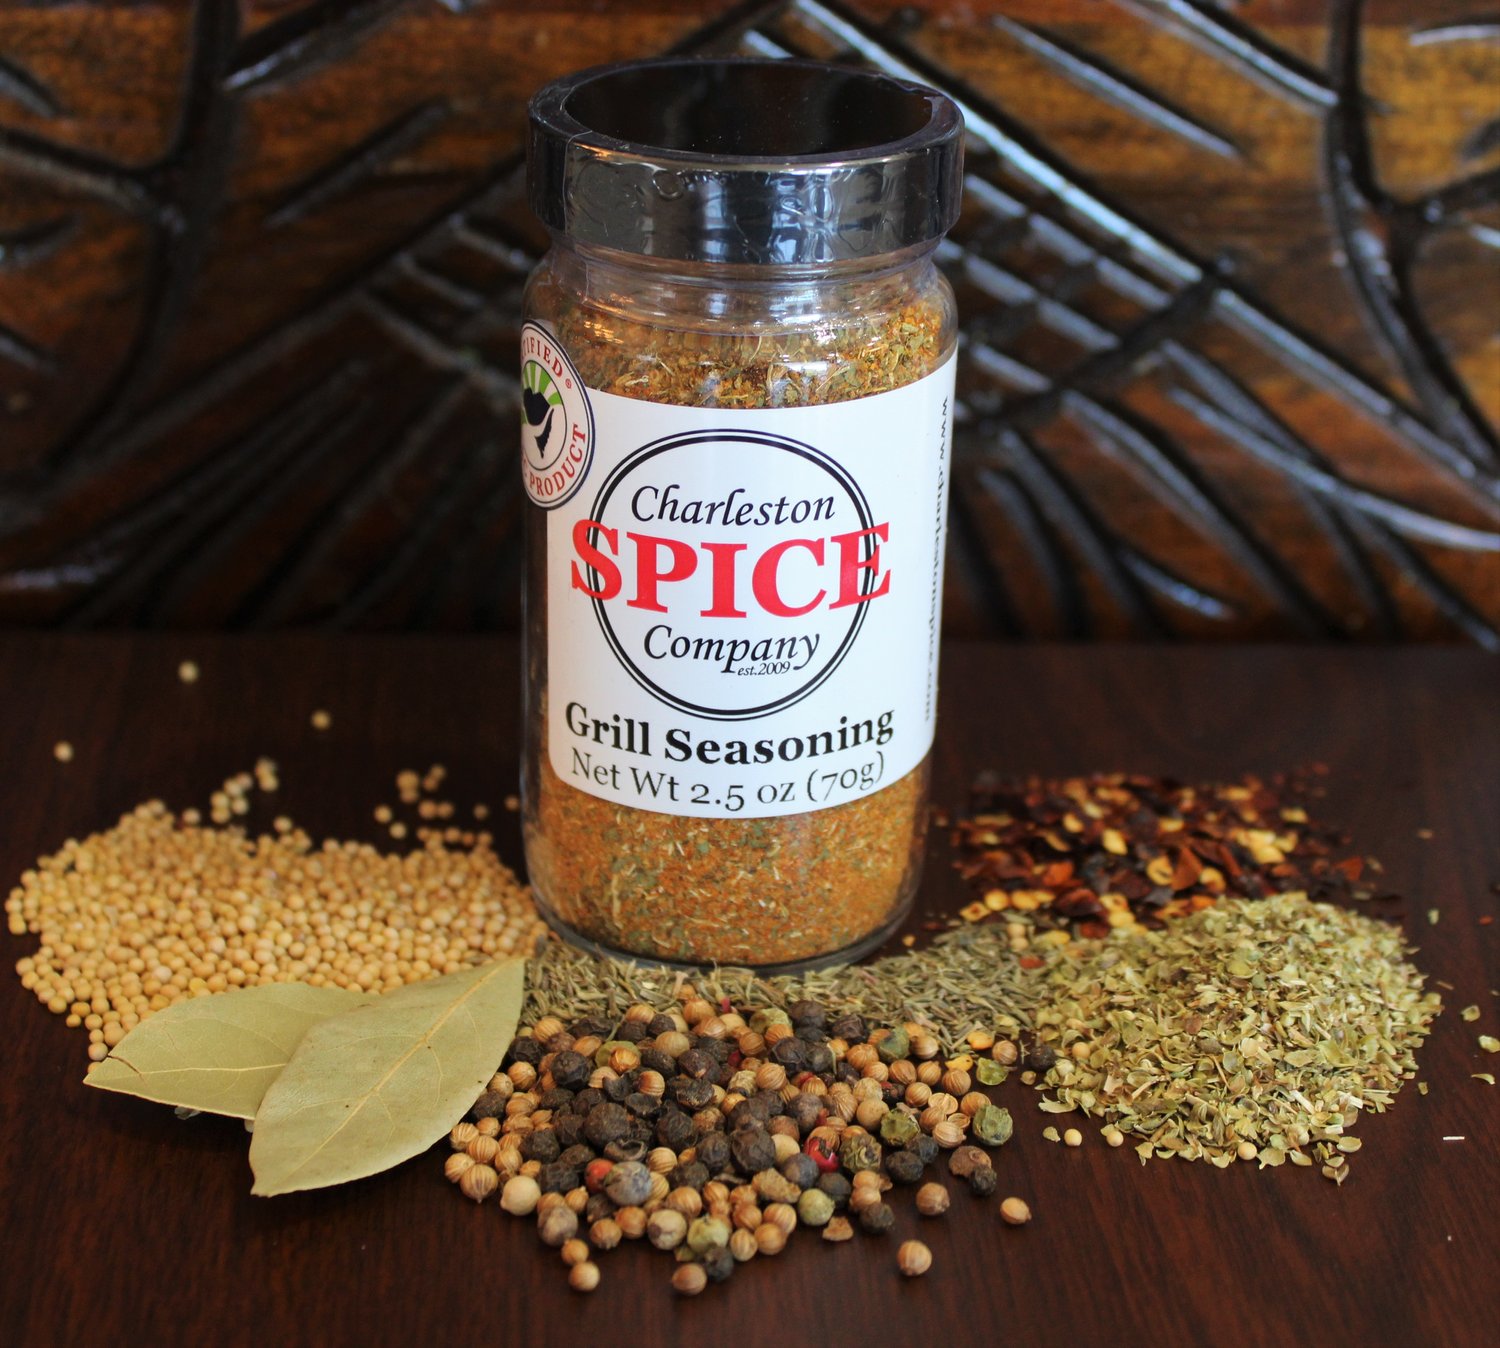 Organic Spices by Charleston Spice Company